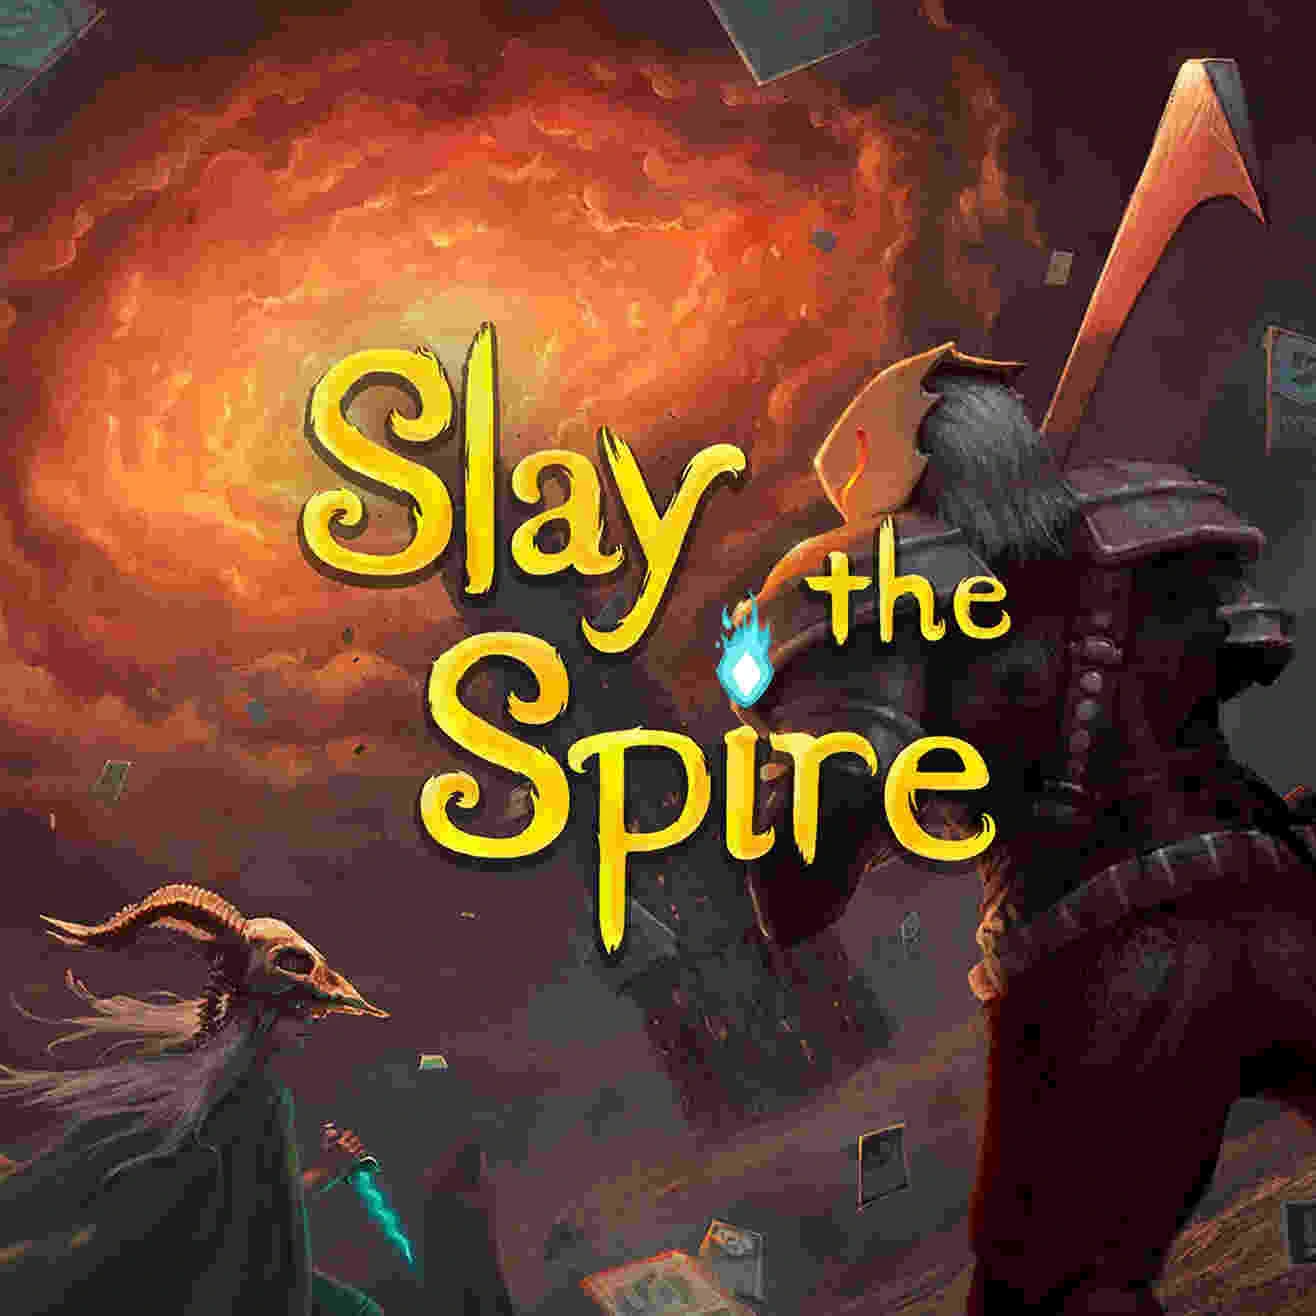 Slay the Spire Mod Apk 2.2.8 (Unlimited Money) Full Version Download